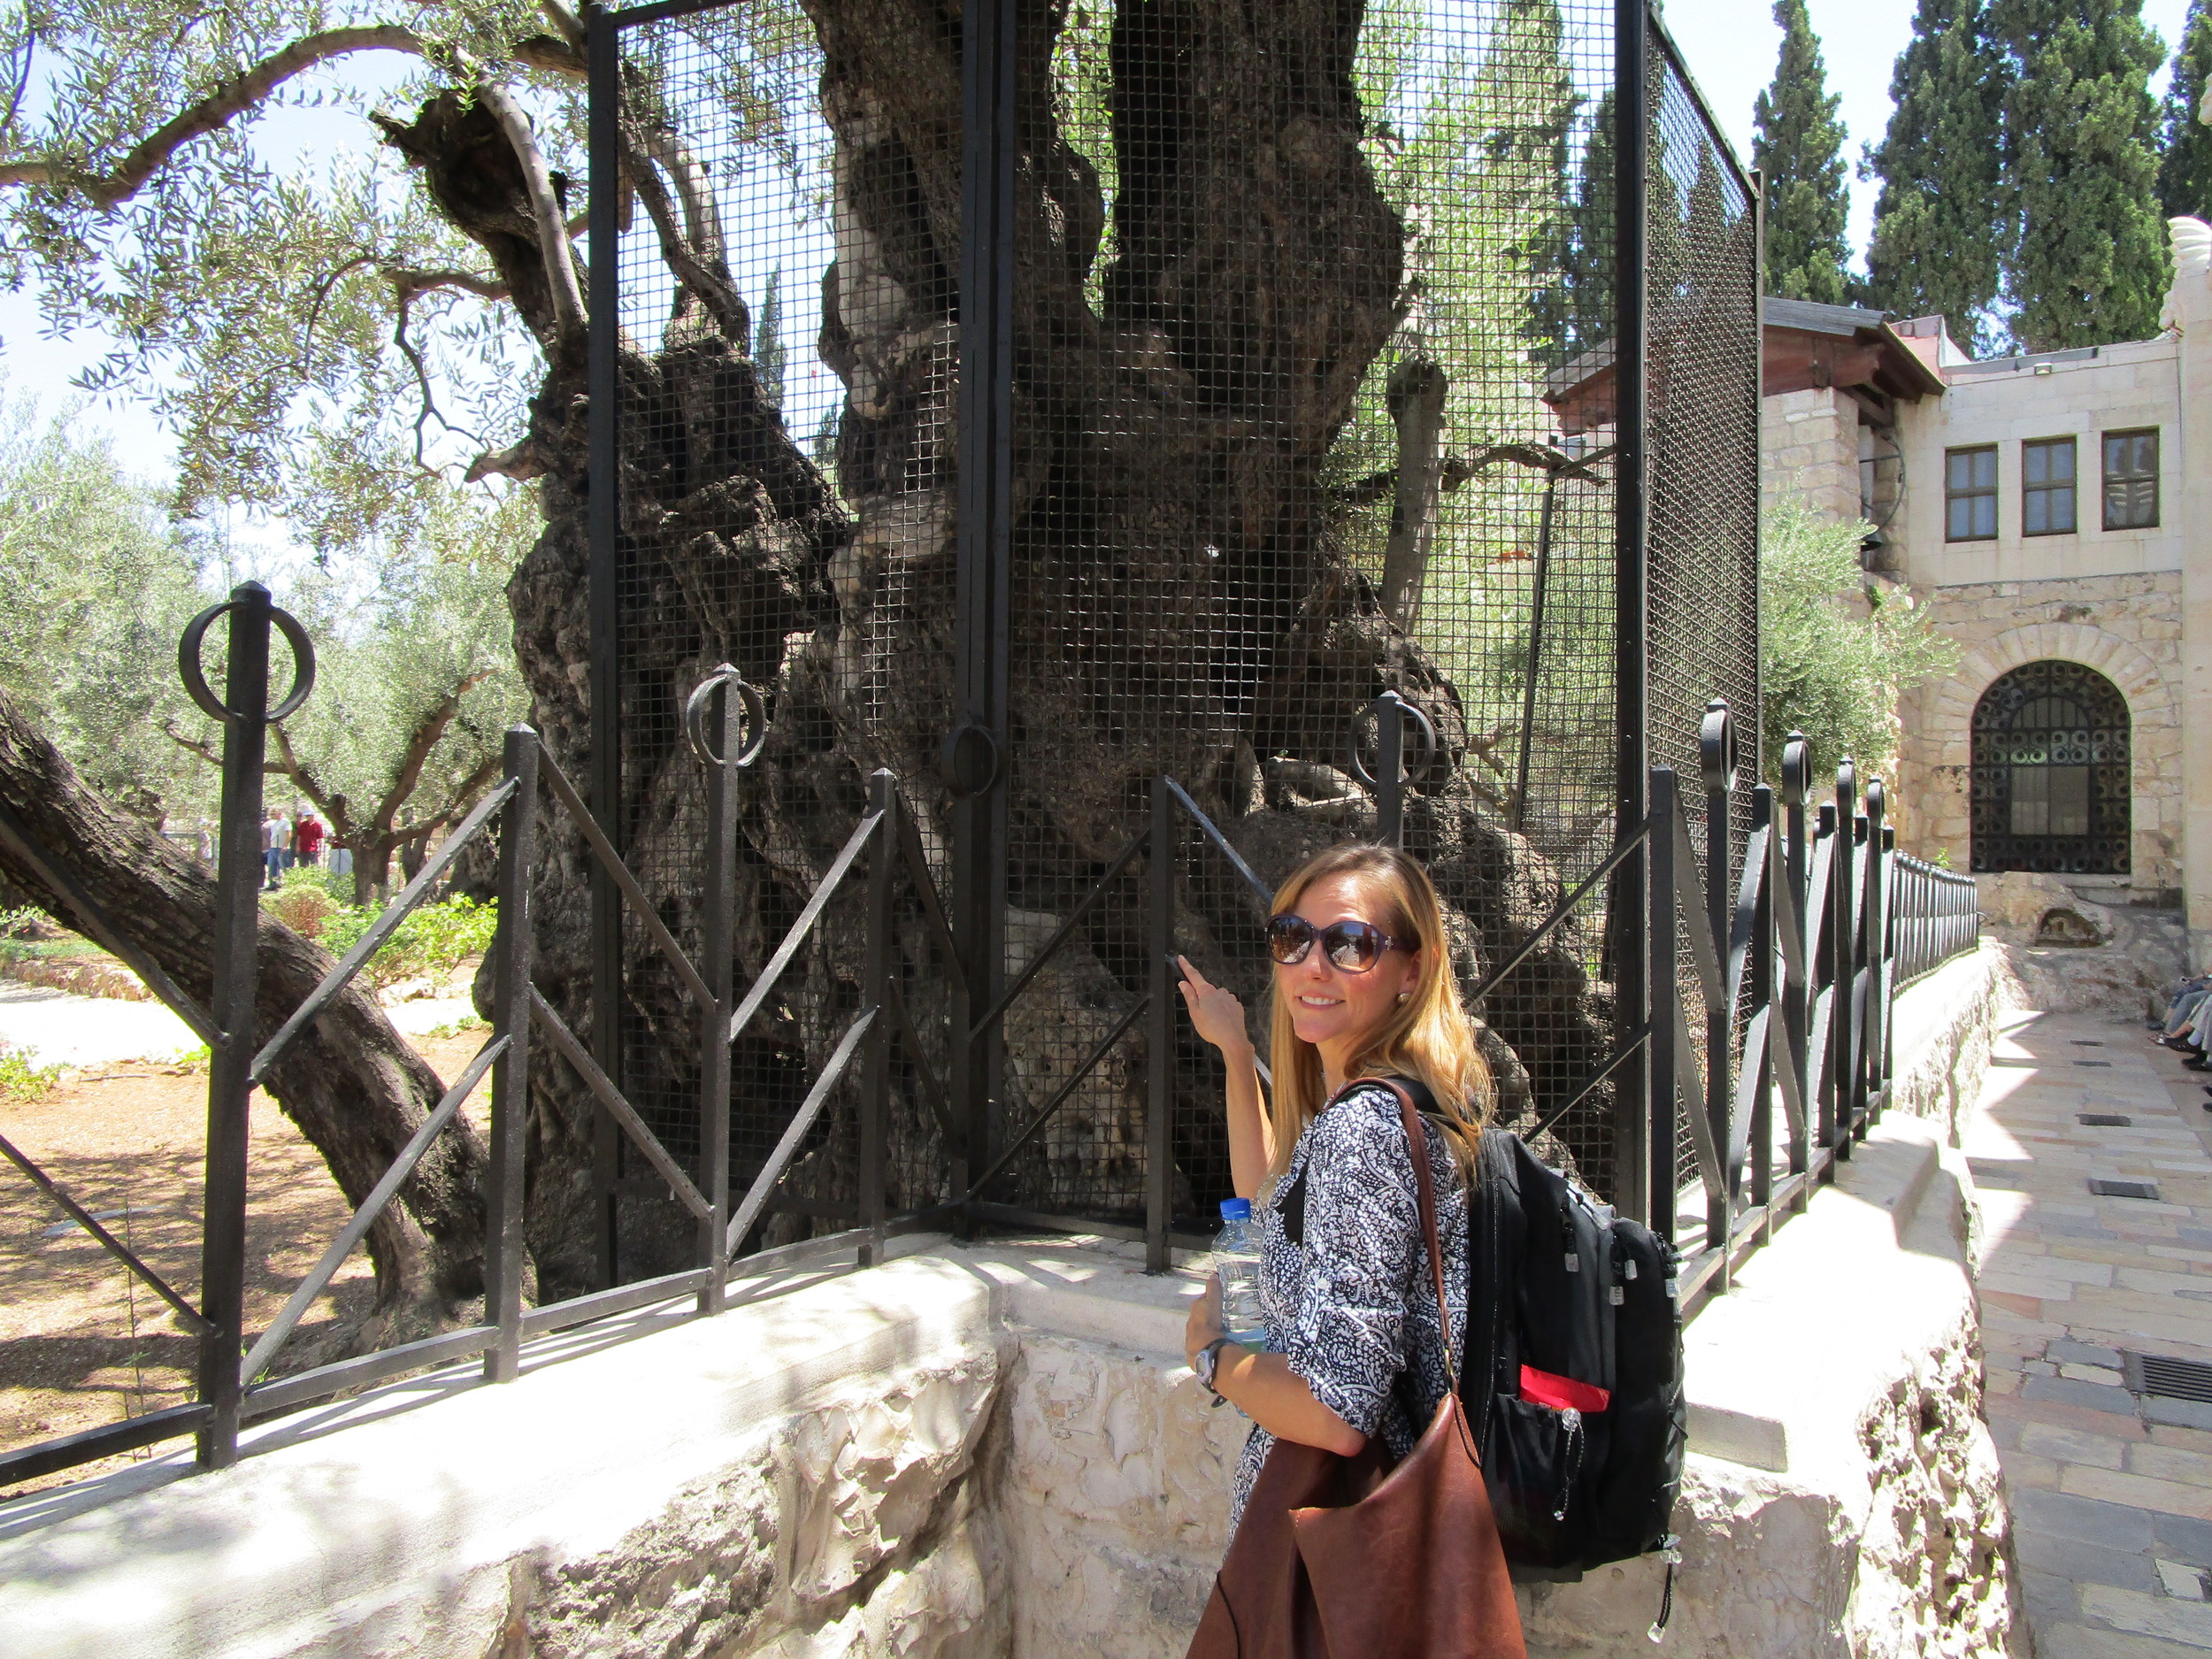  My love, Loretta, standing near the garden. This olive tree is estimated to be nearly 5-6,000 years old. We know with absolute certainty that this tree was there the night Jesus prayed, wept and was arrested. 